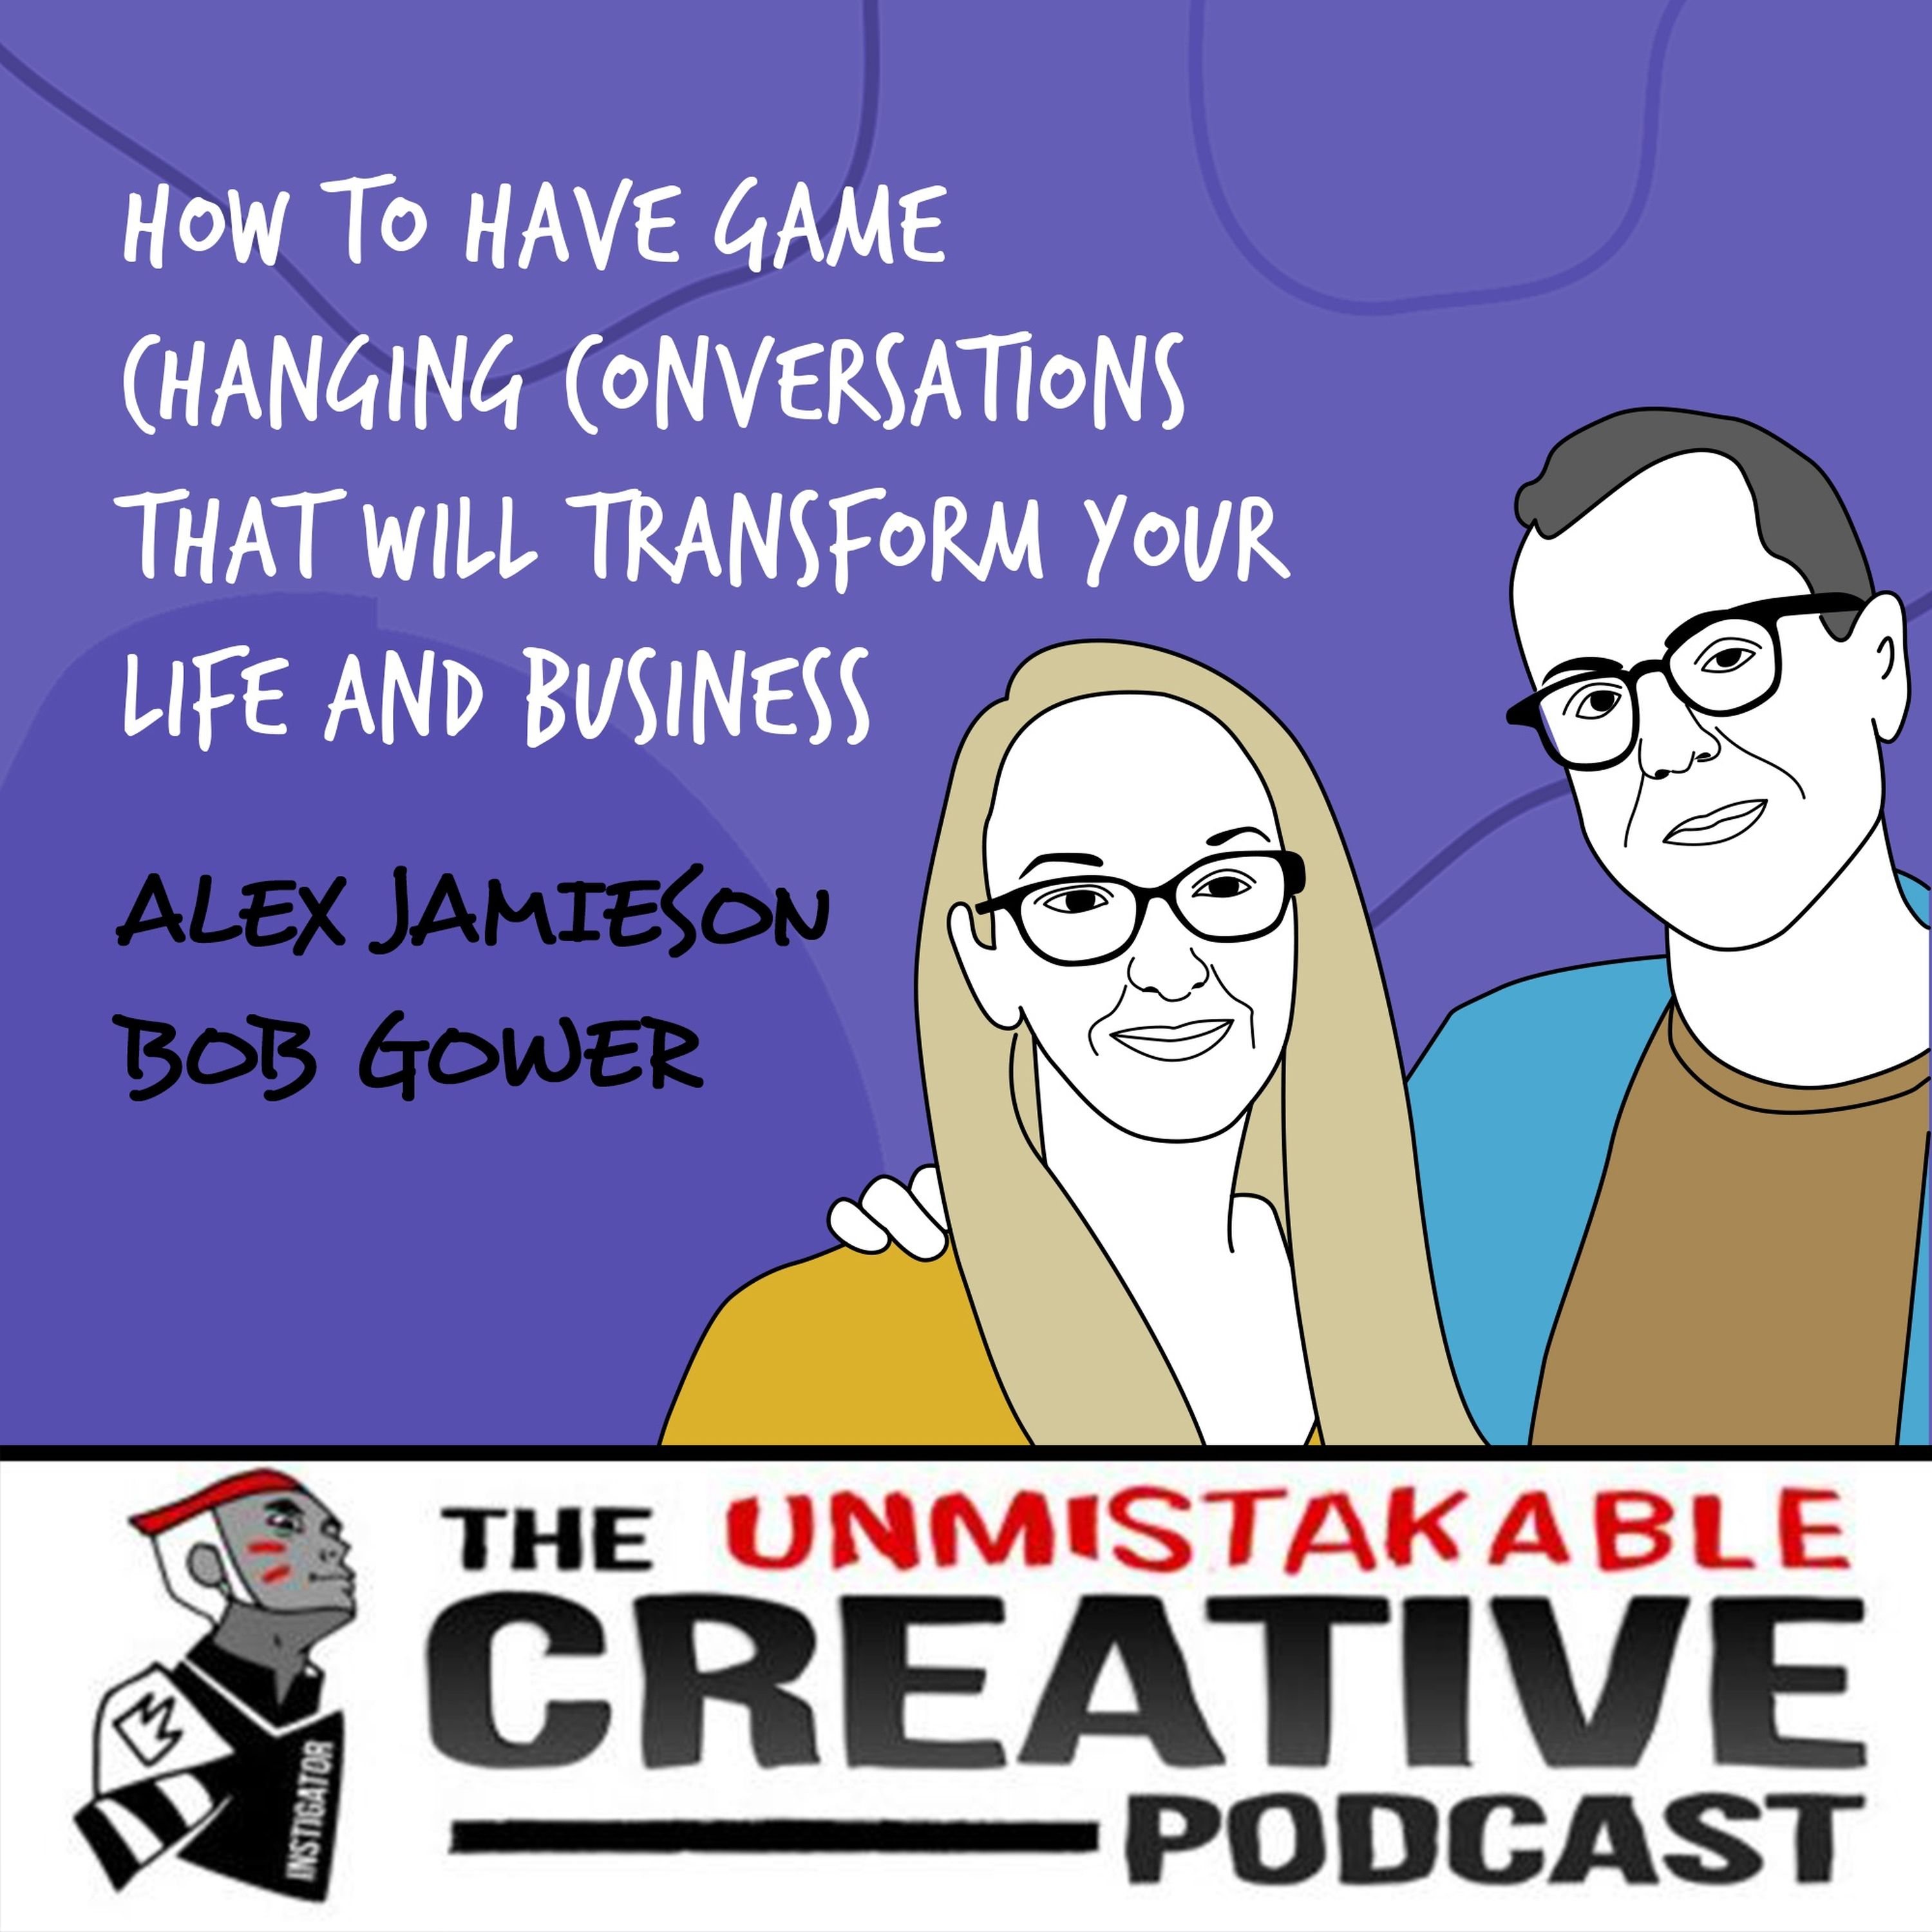 Alex Jamieson & Bob Gower | How to Have Game Changing Conversations That Will Transform Your Life and Business